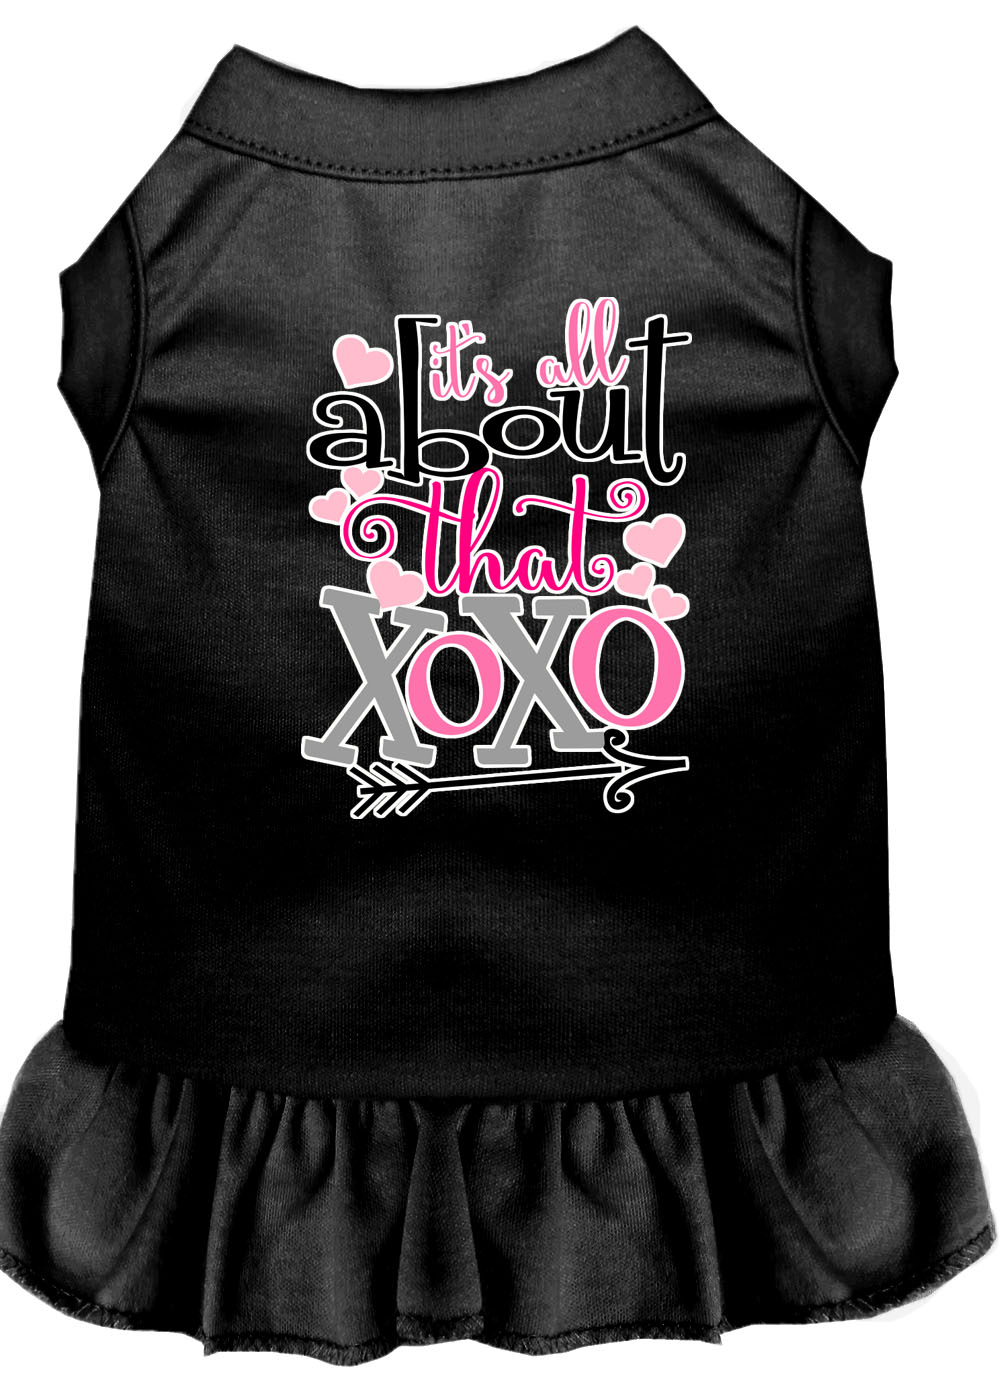 All about the XOXO Screen Print Dog Dress Black XS